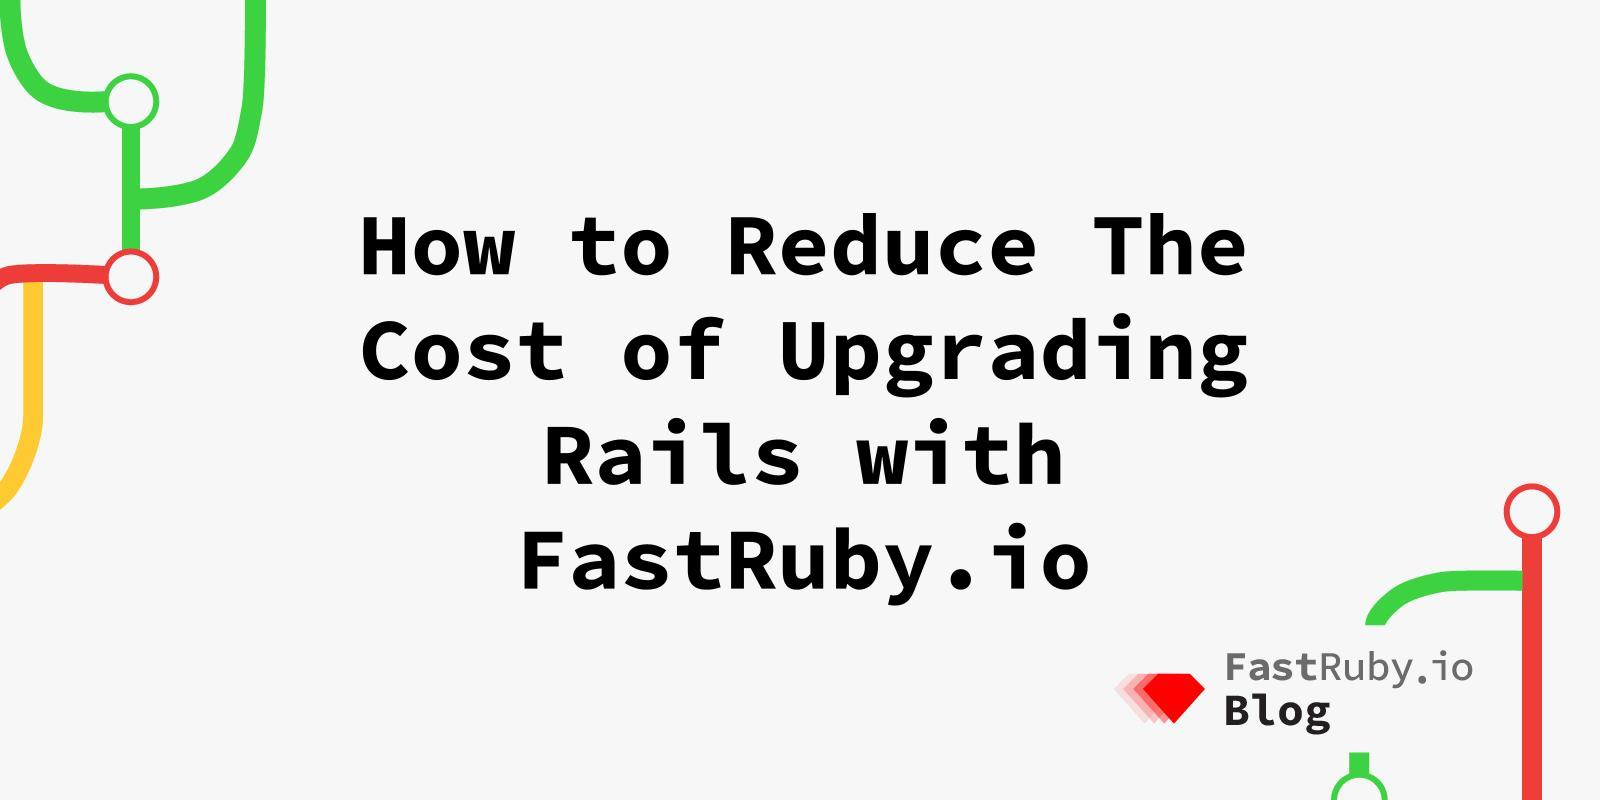 How to Reduce The Cost of Upgrading Rails with FastRuby.io